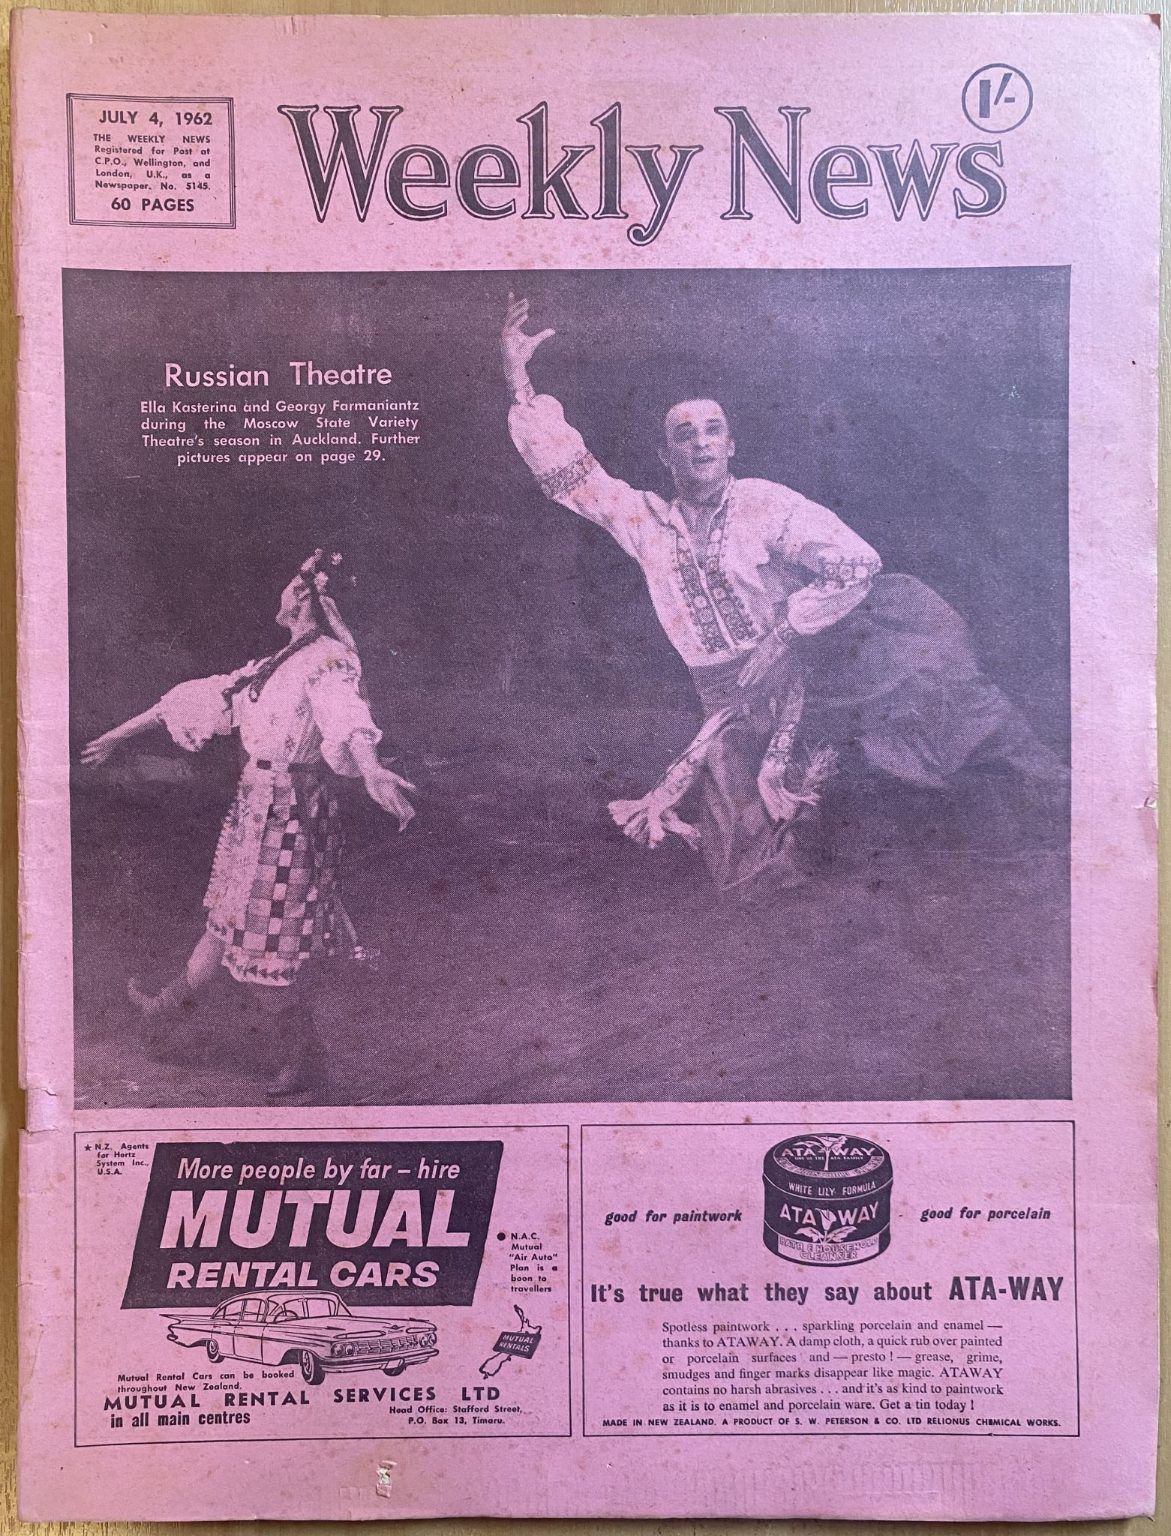 OLD NEWSPAPER: The Weekly News, No. 5145, 4 July 1962